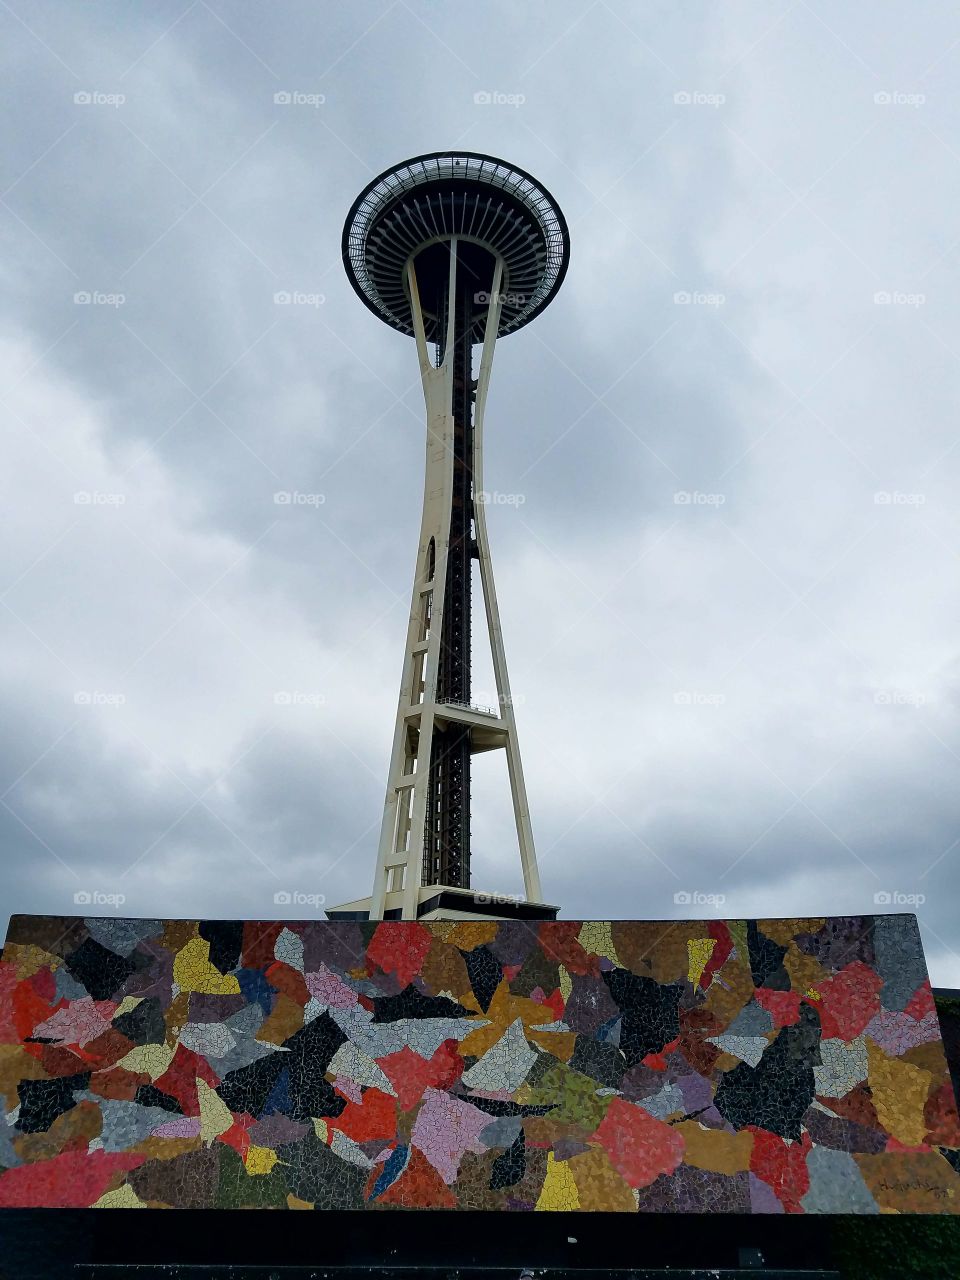 Seattle art and Space Needle